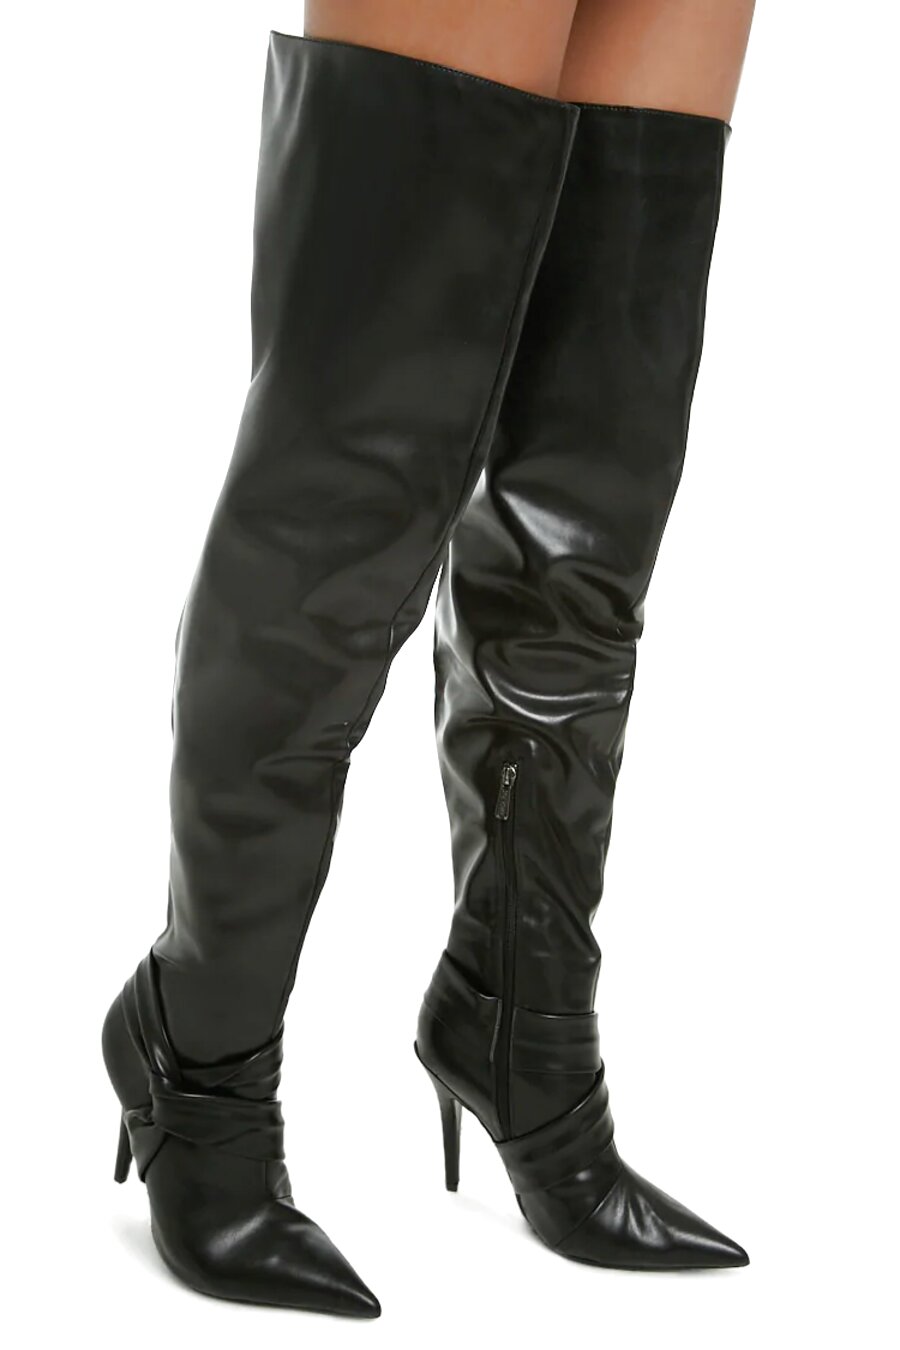 real leather thigh high boots uk